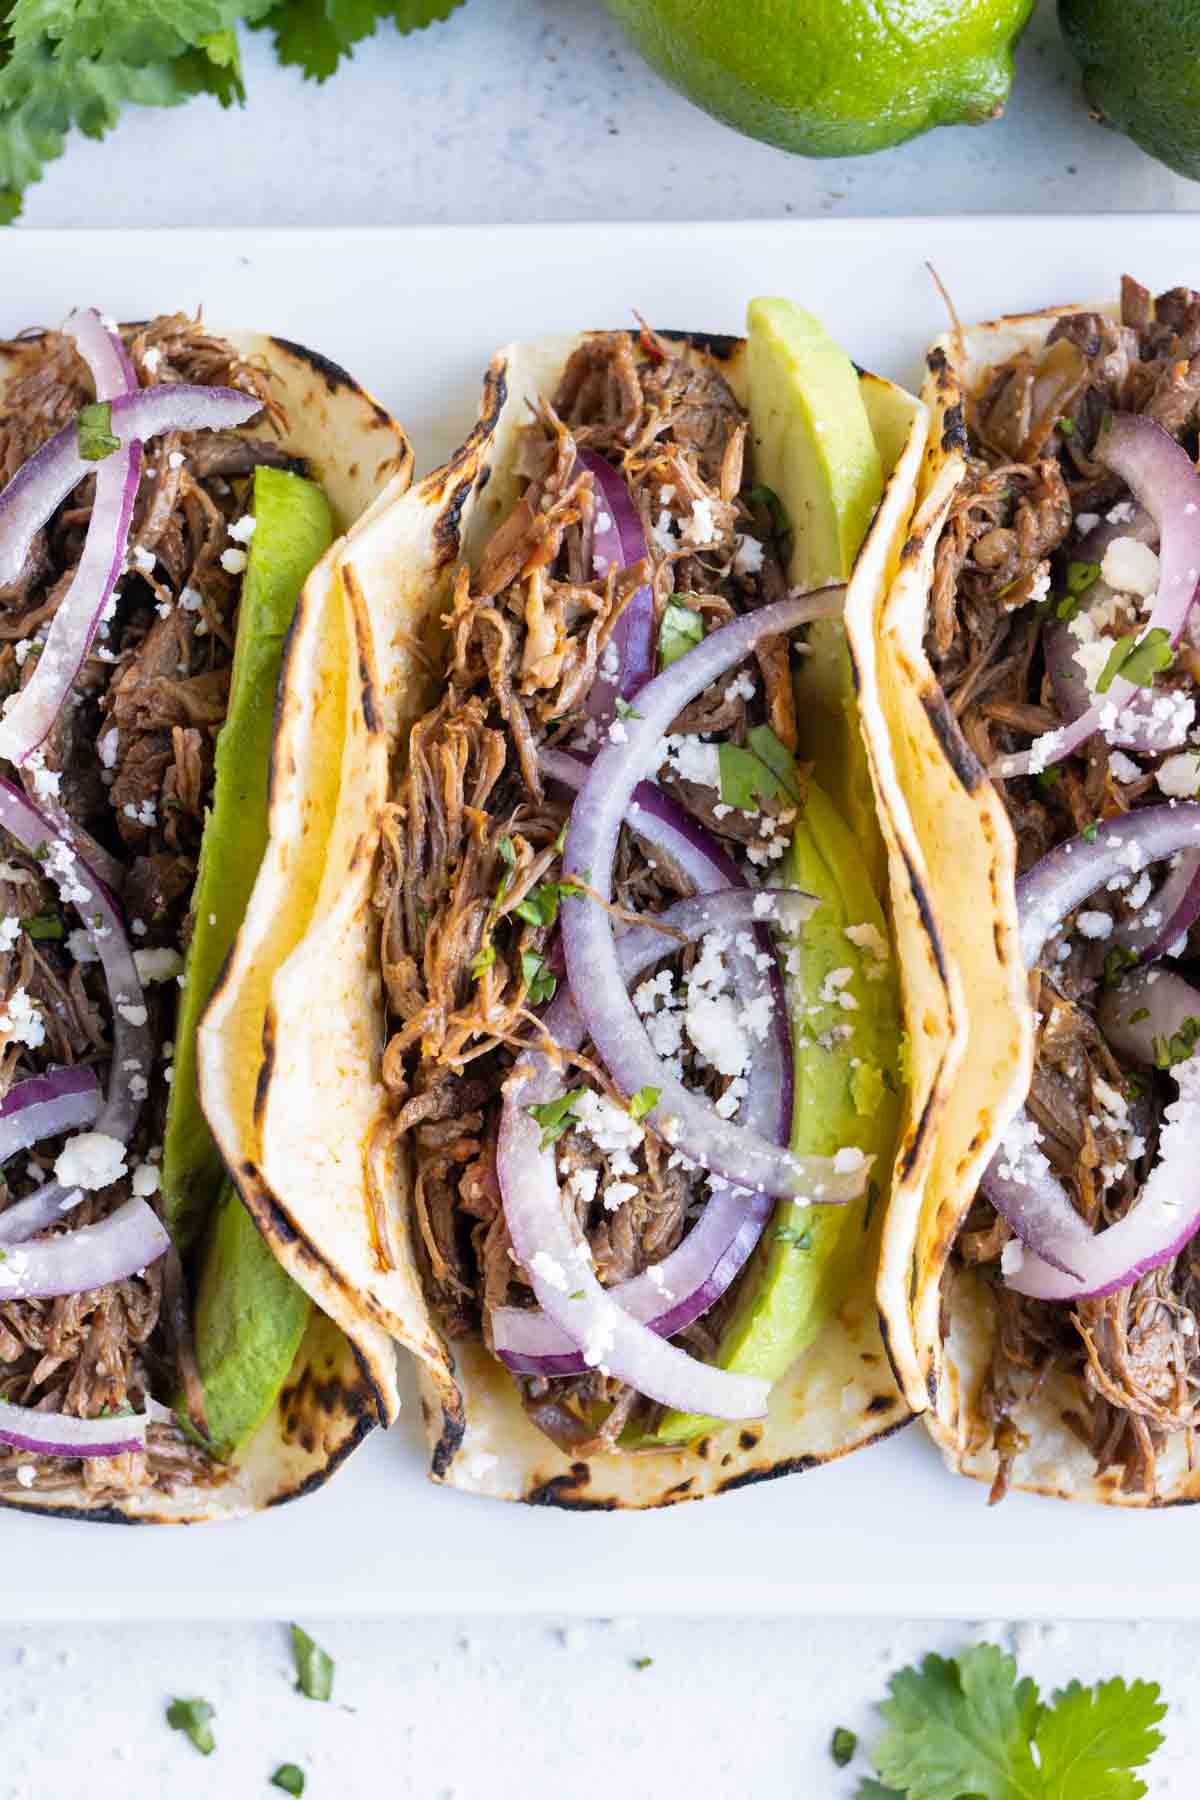 Tacos are loaded with beef barbacoa and served with red onion and cilantro.